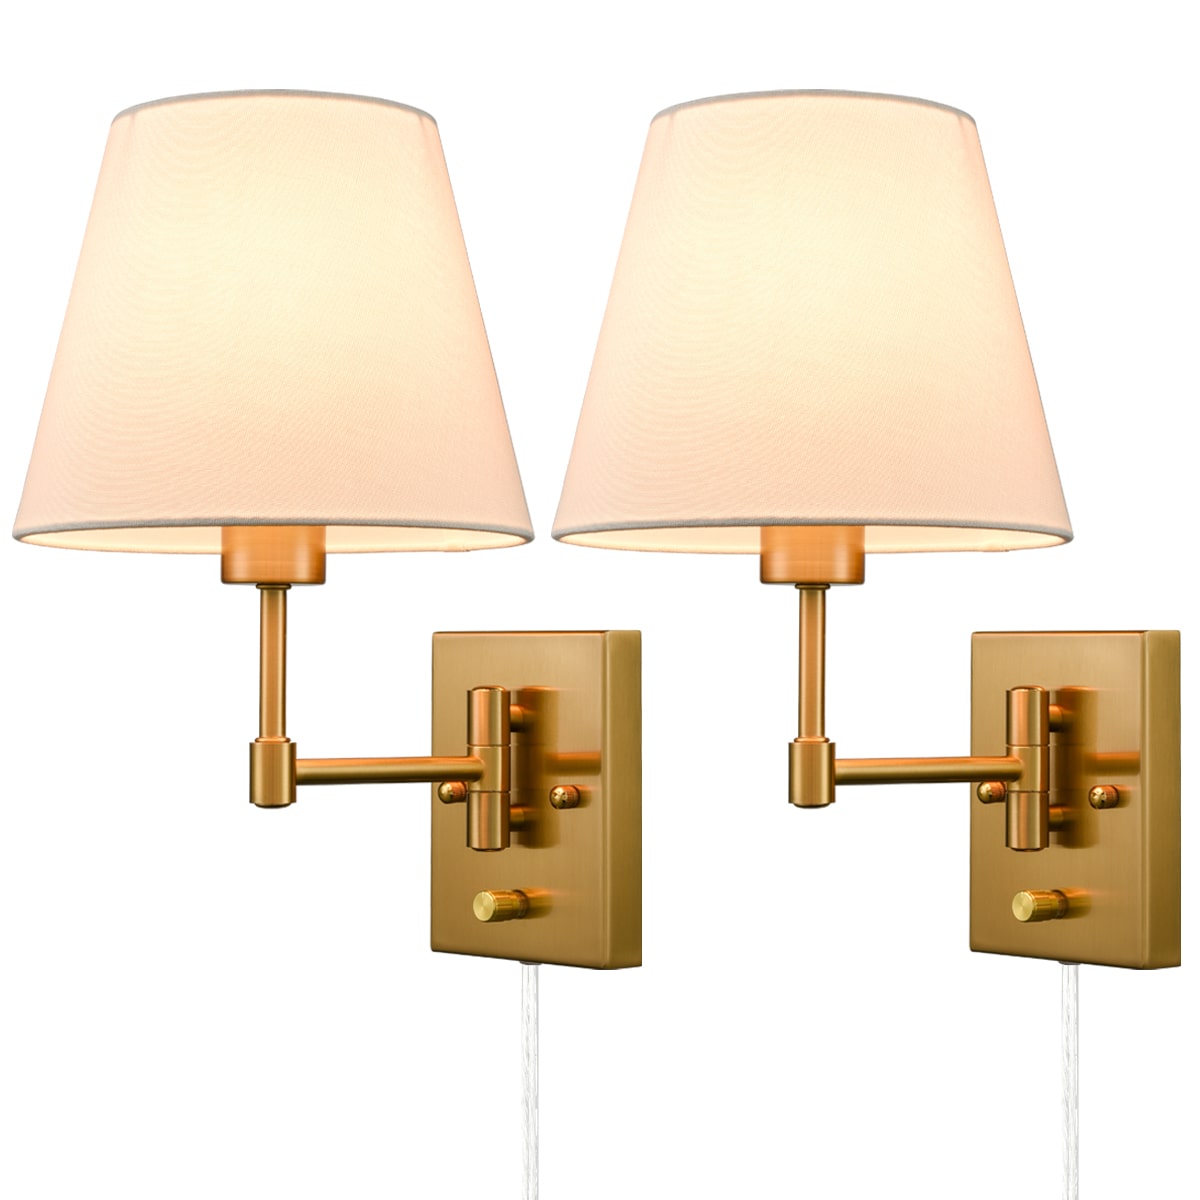 Beige Shade Swing Arm Plug-in Wall Sconce -Set of 2